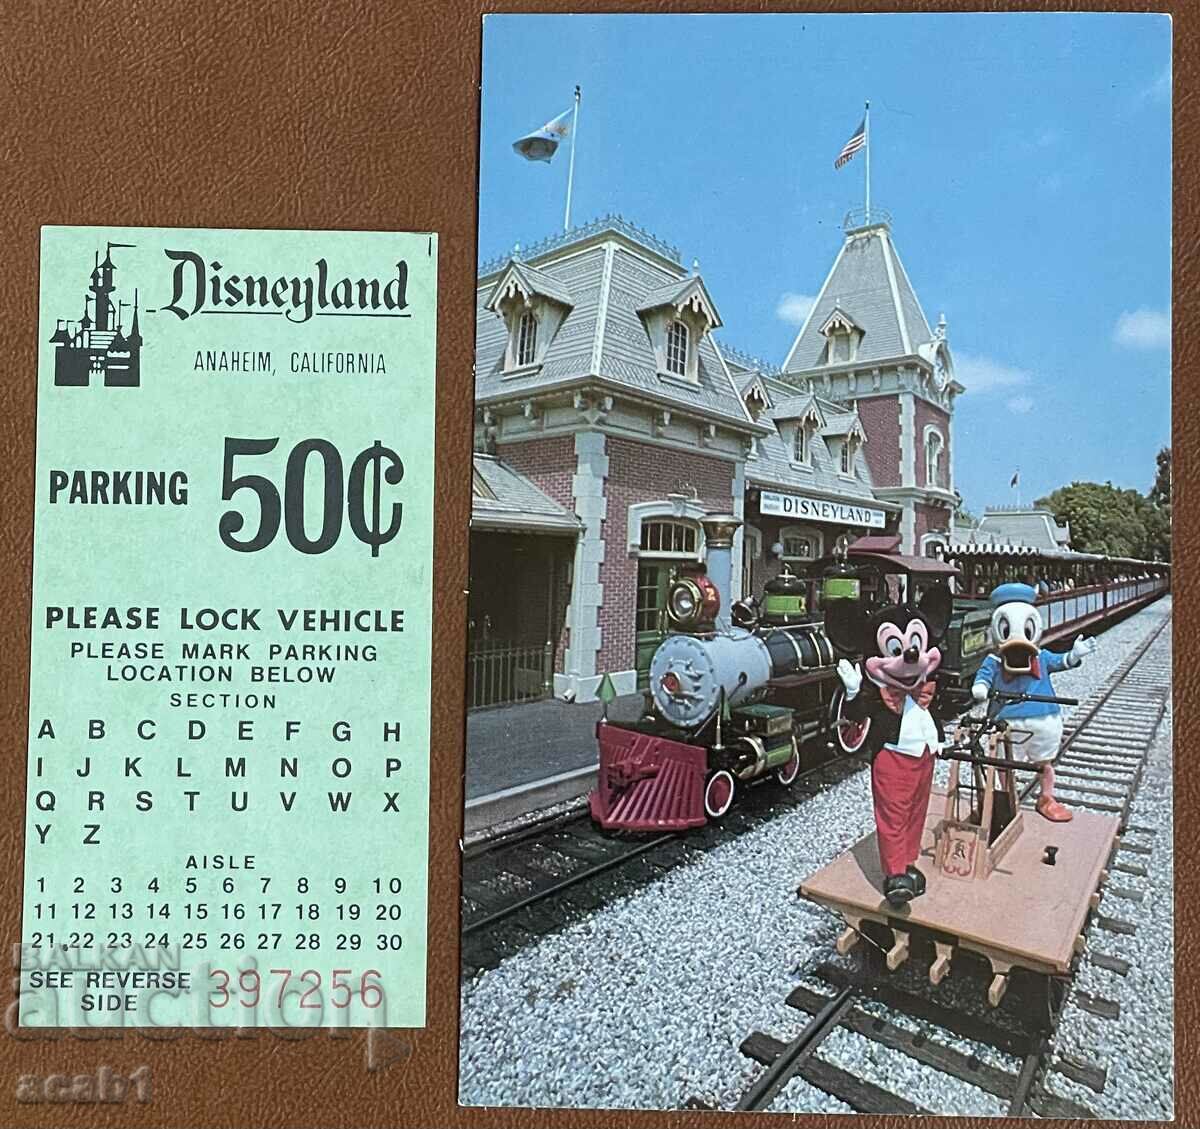 Disneyland Ticket from the Parking + Post. Card